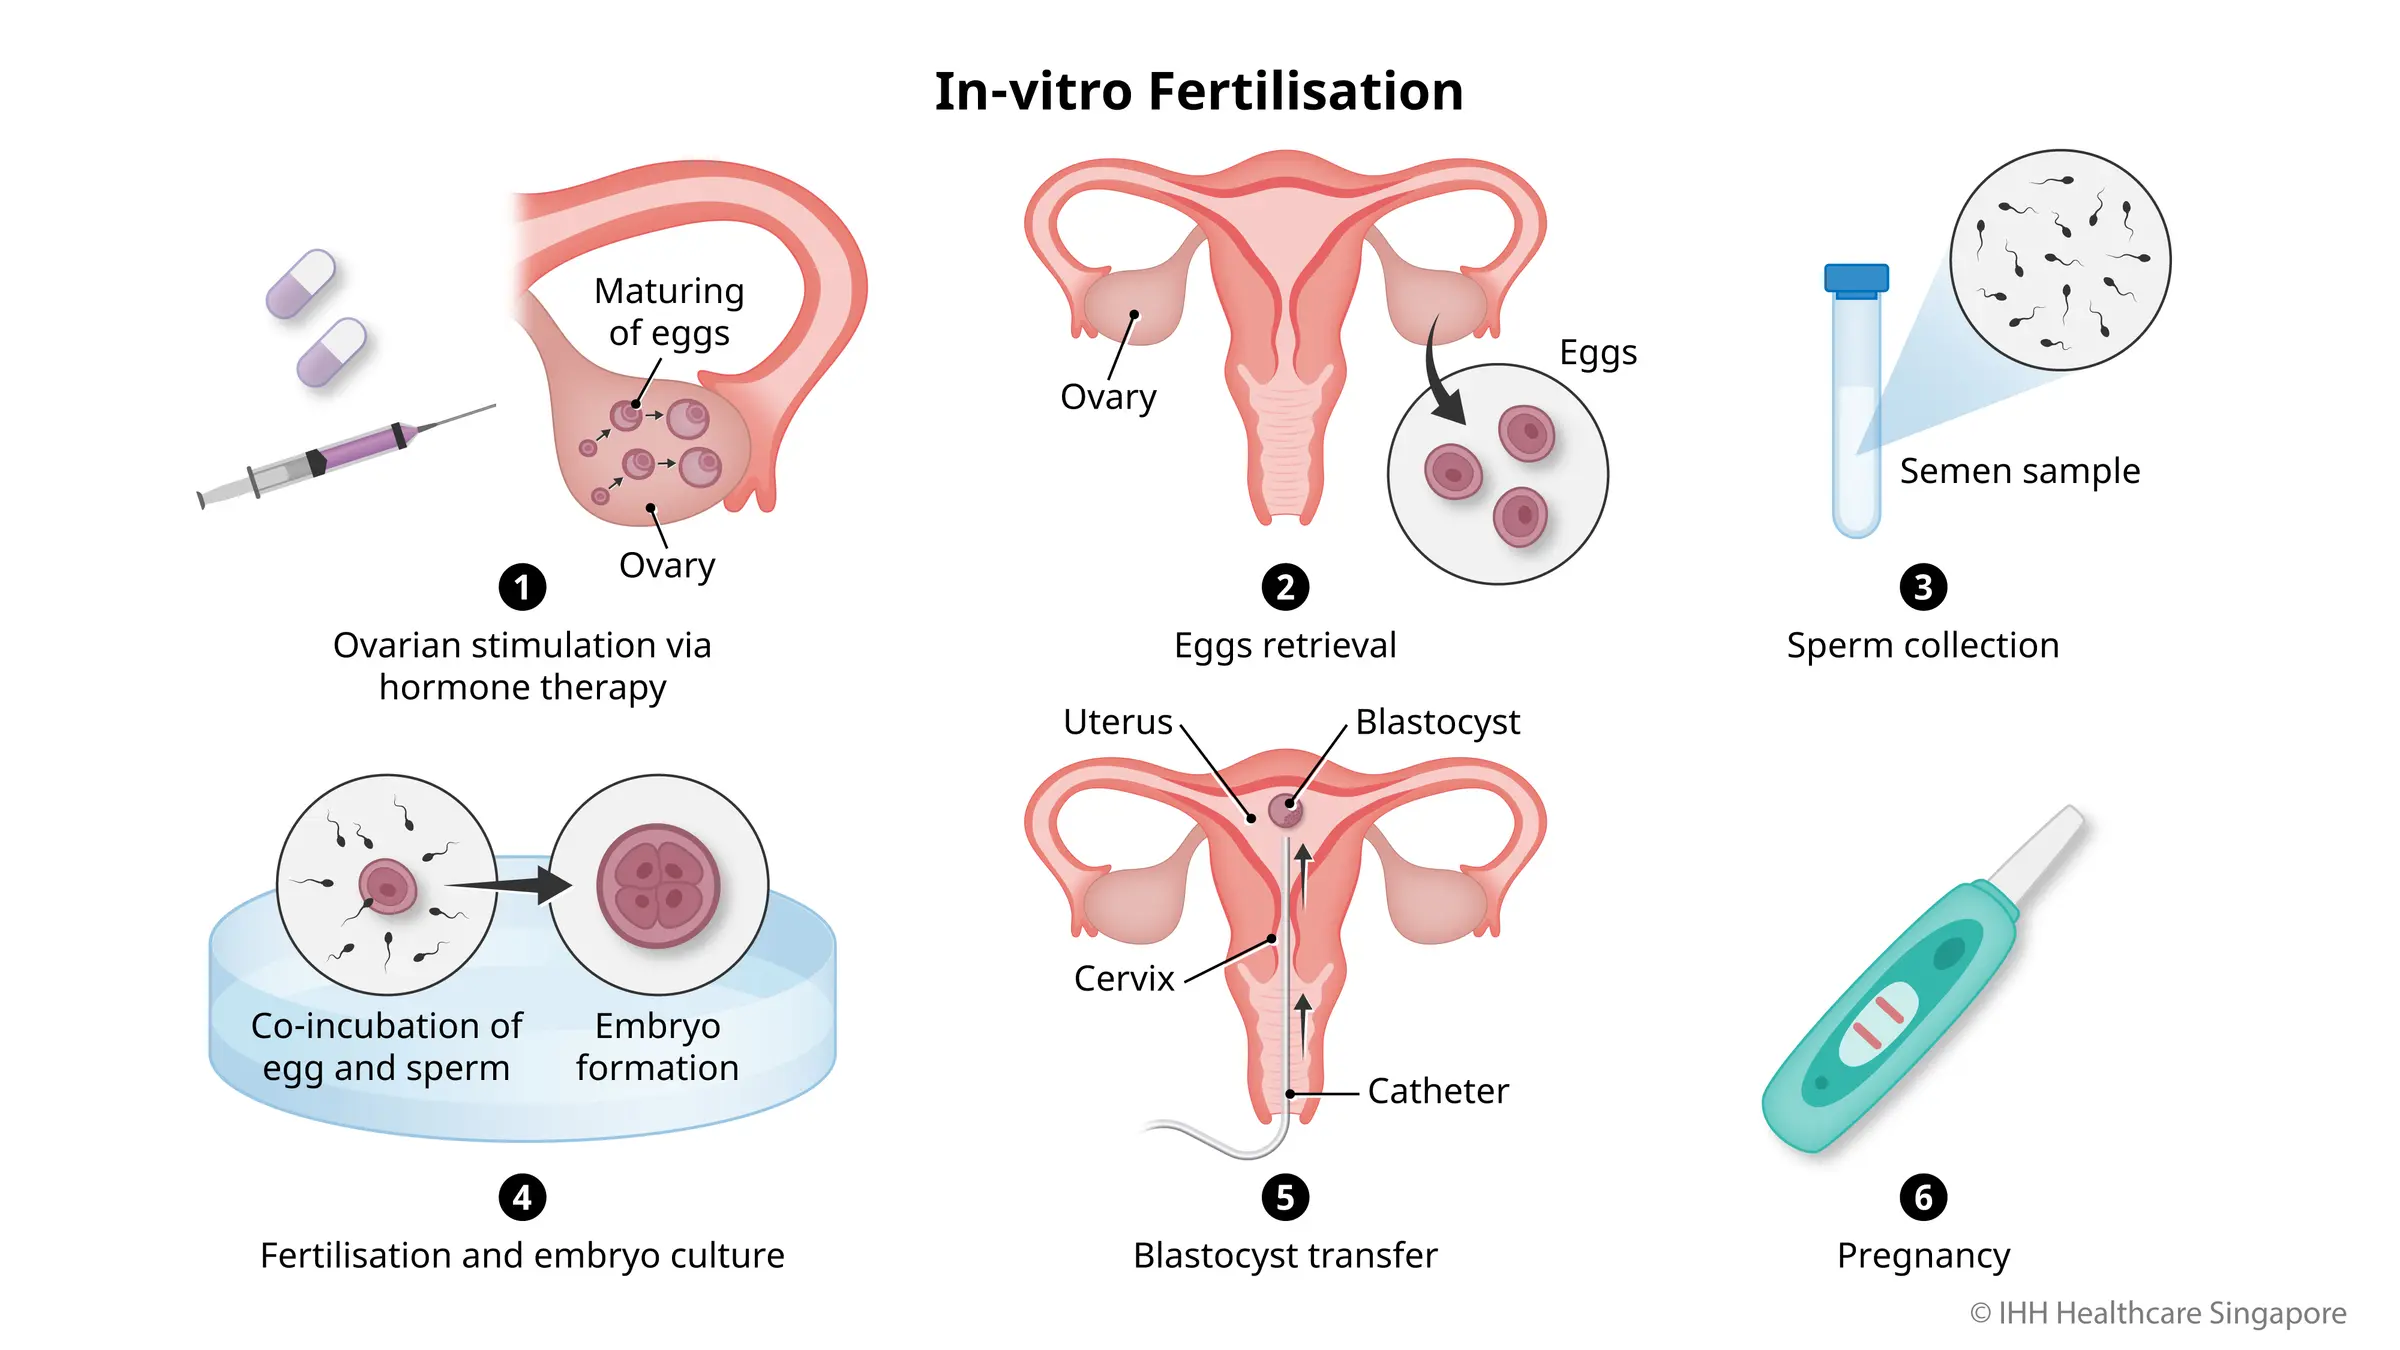 What can you expect for IVF?